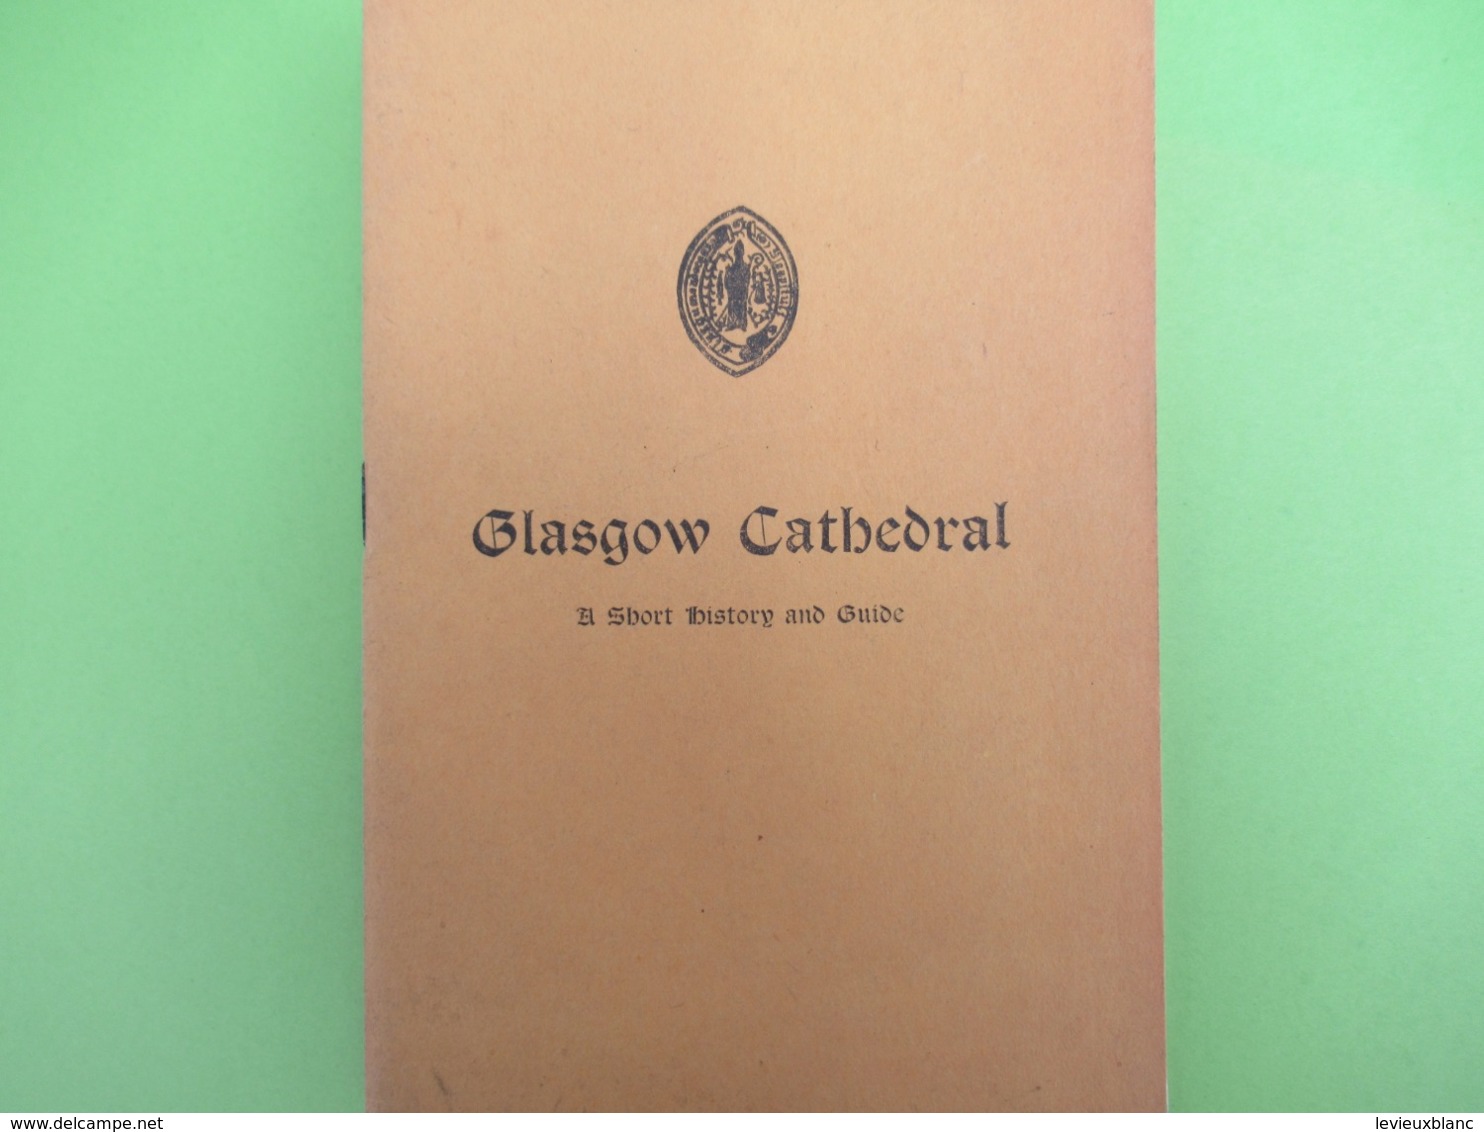 Guide Historique/A Short History And Guide/GLASGOW CATHEDRAL/A Nevile Davidson/Minister Of Glasgow/1938          PGC383 - Arquitectura